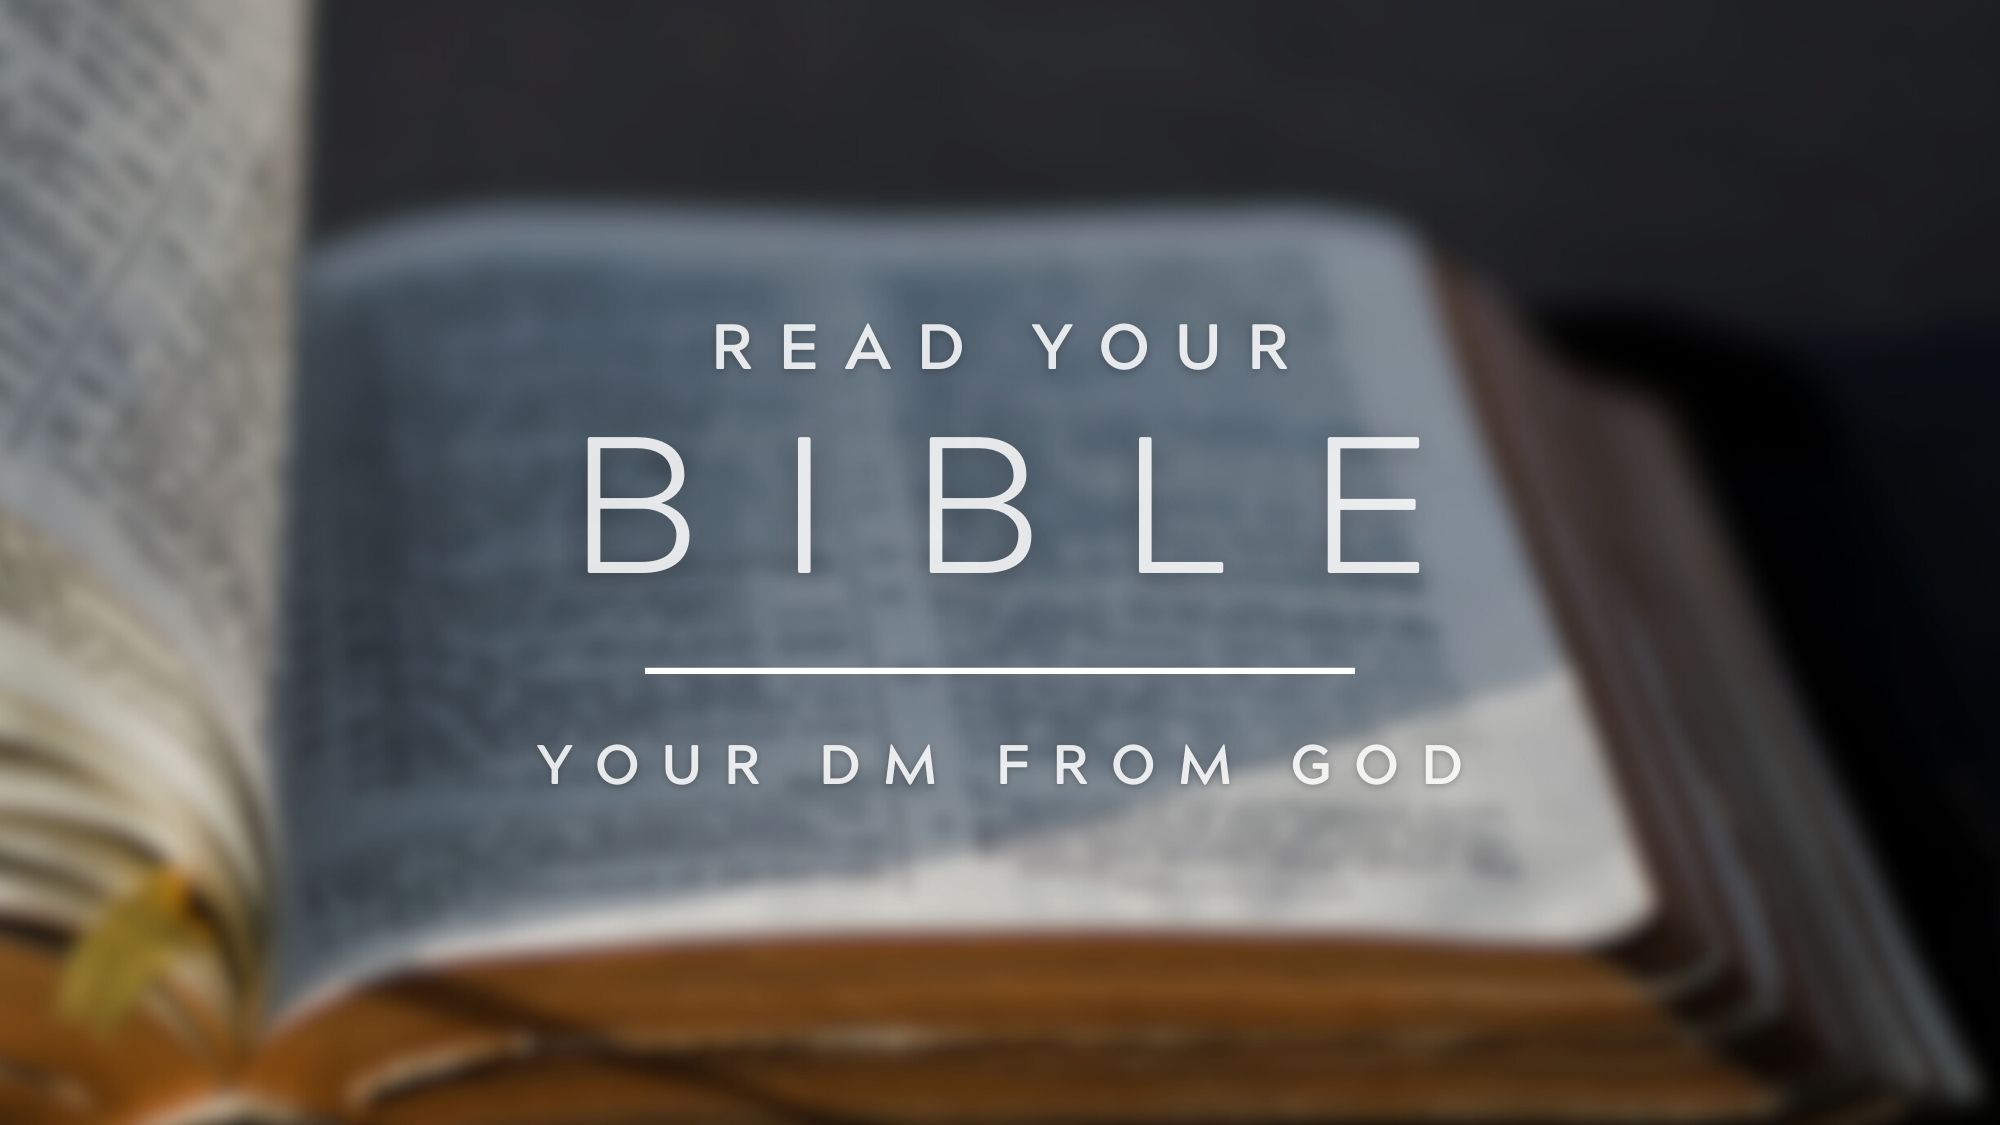 Read your Bible "Your DM from God"